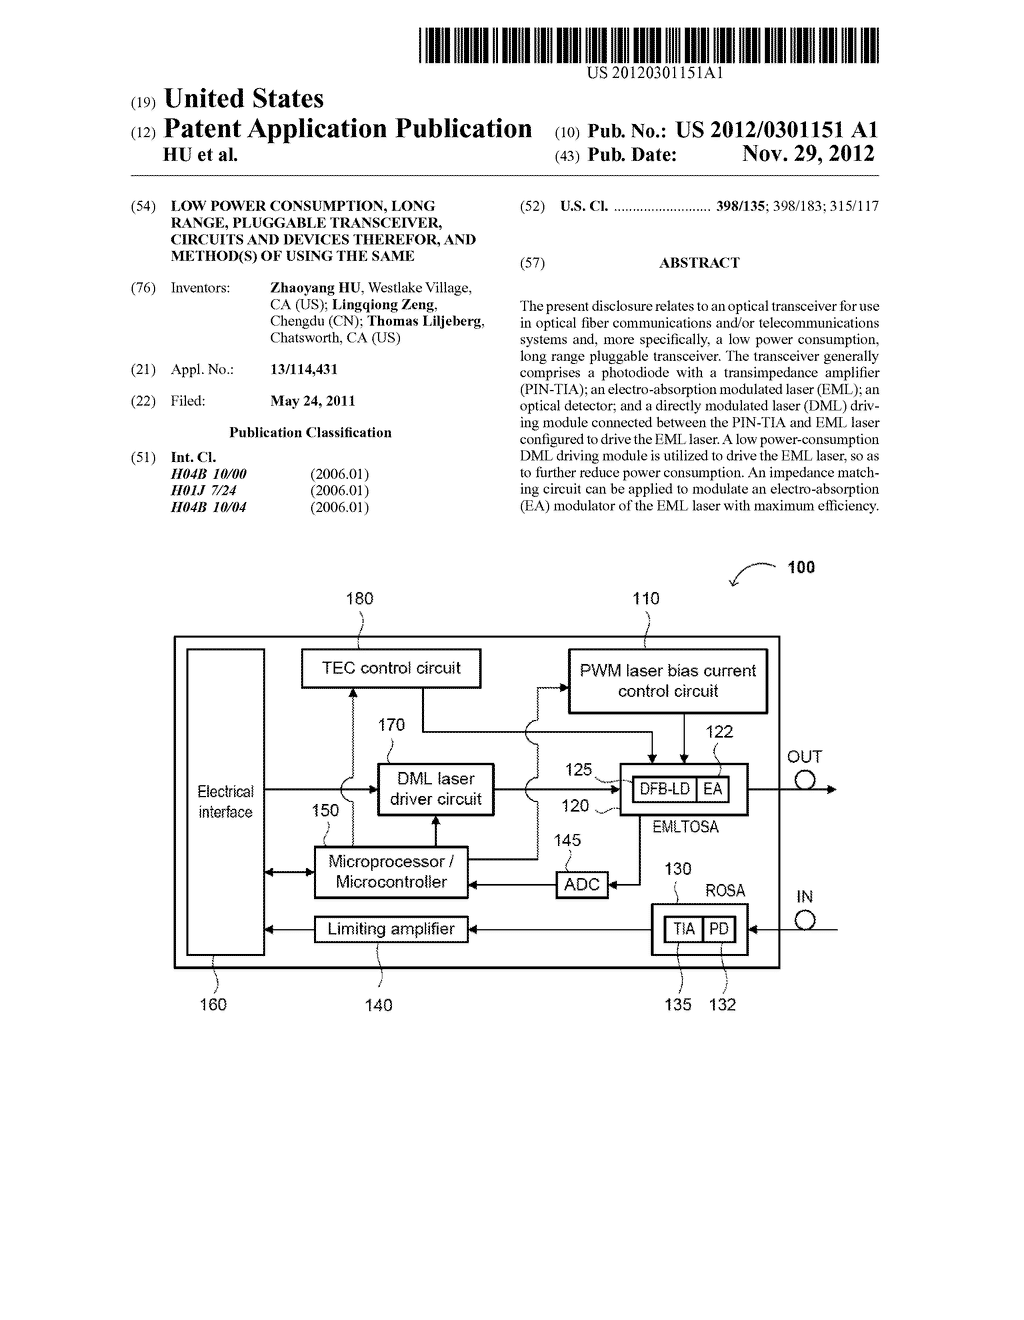 Low Power Consumption, Long Range, Pluggable Transceiver, Circuits and     Devices Therefor, and Method(s) of Using the Same - diagram, schematic, and image 01